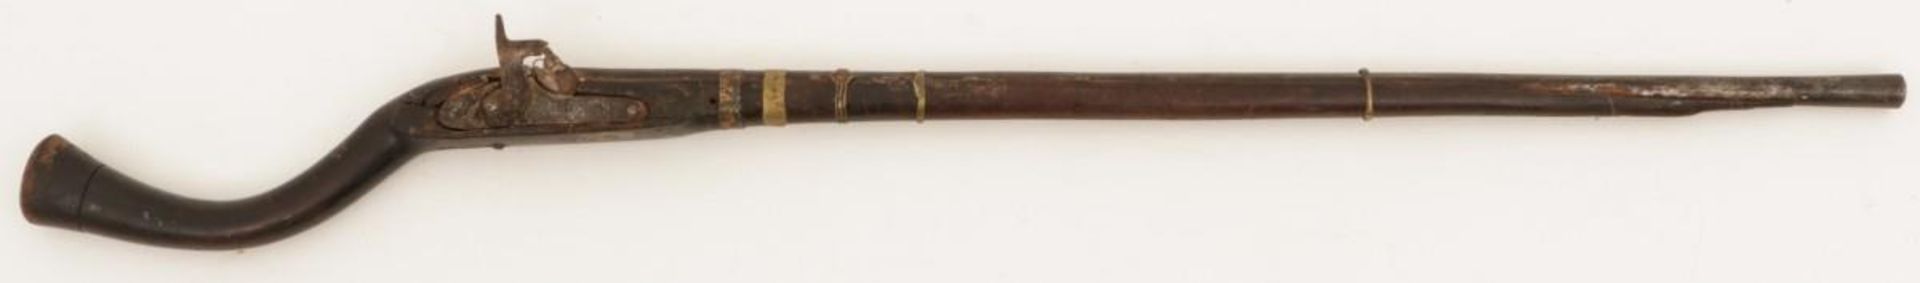 An Afghan percussion rifle, ca. 19th century.